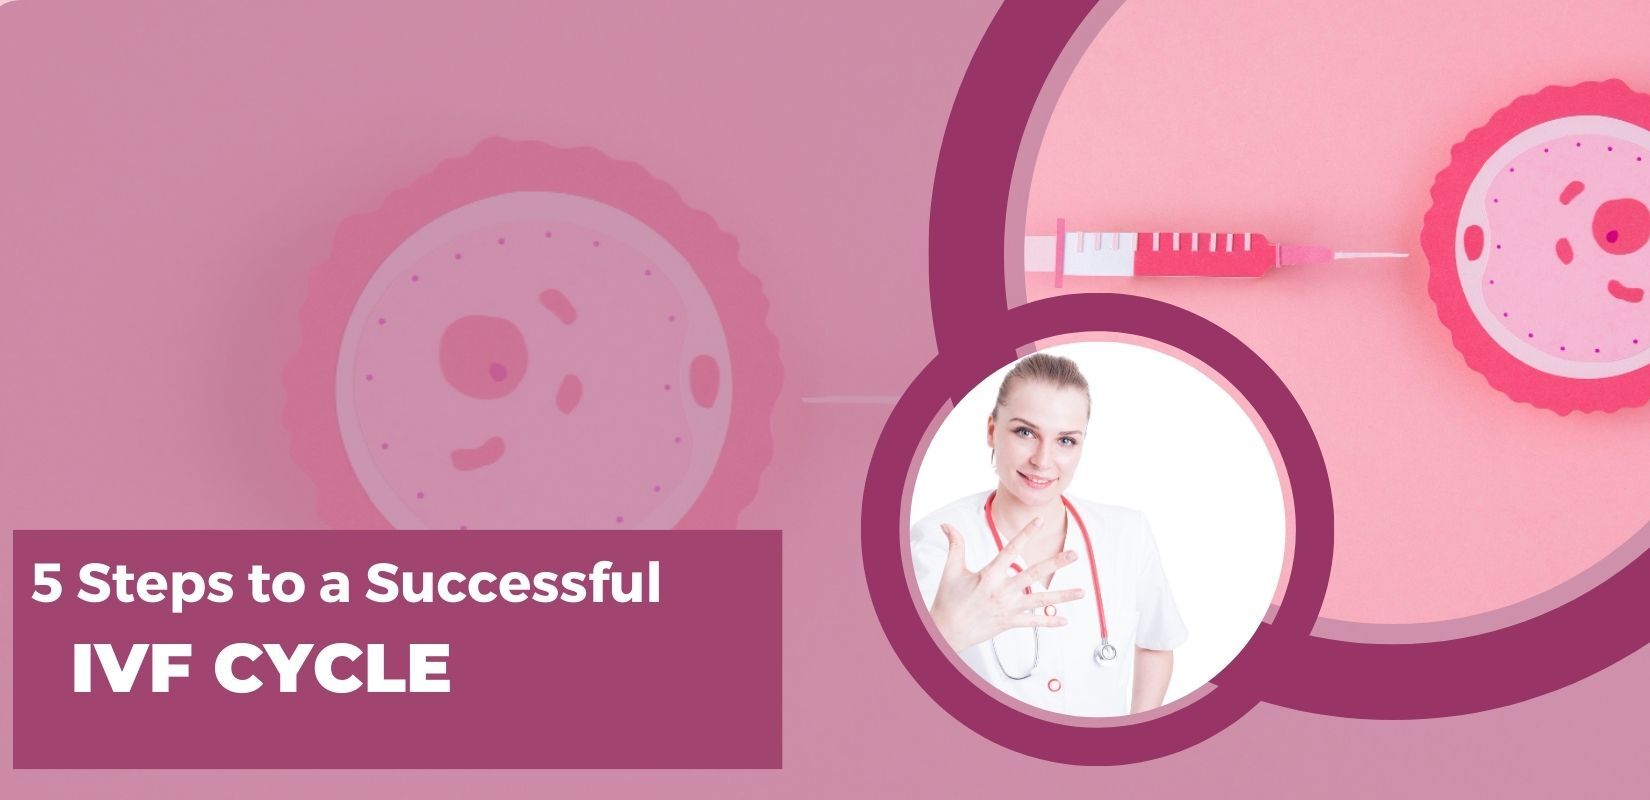 5 Steps to a Successful IVF Cycle